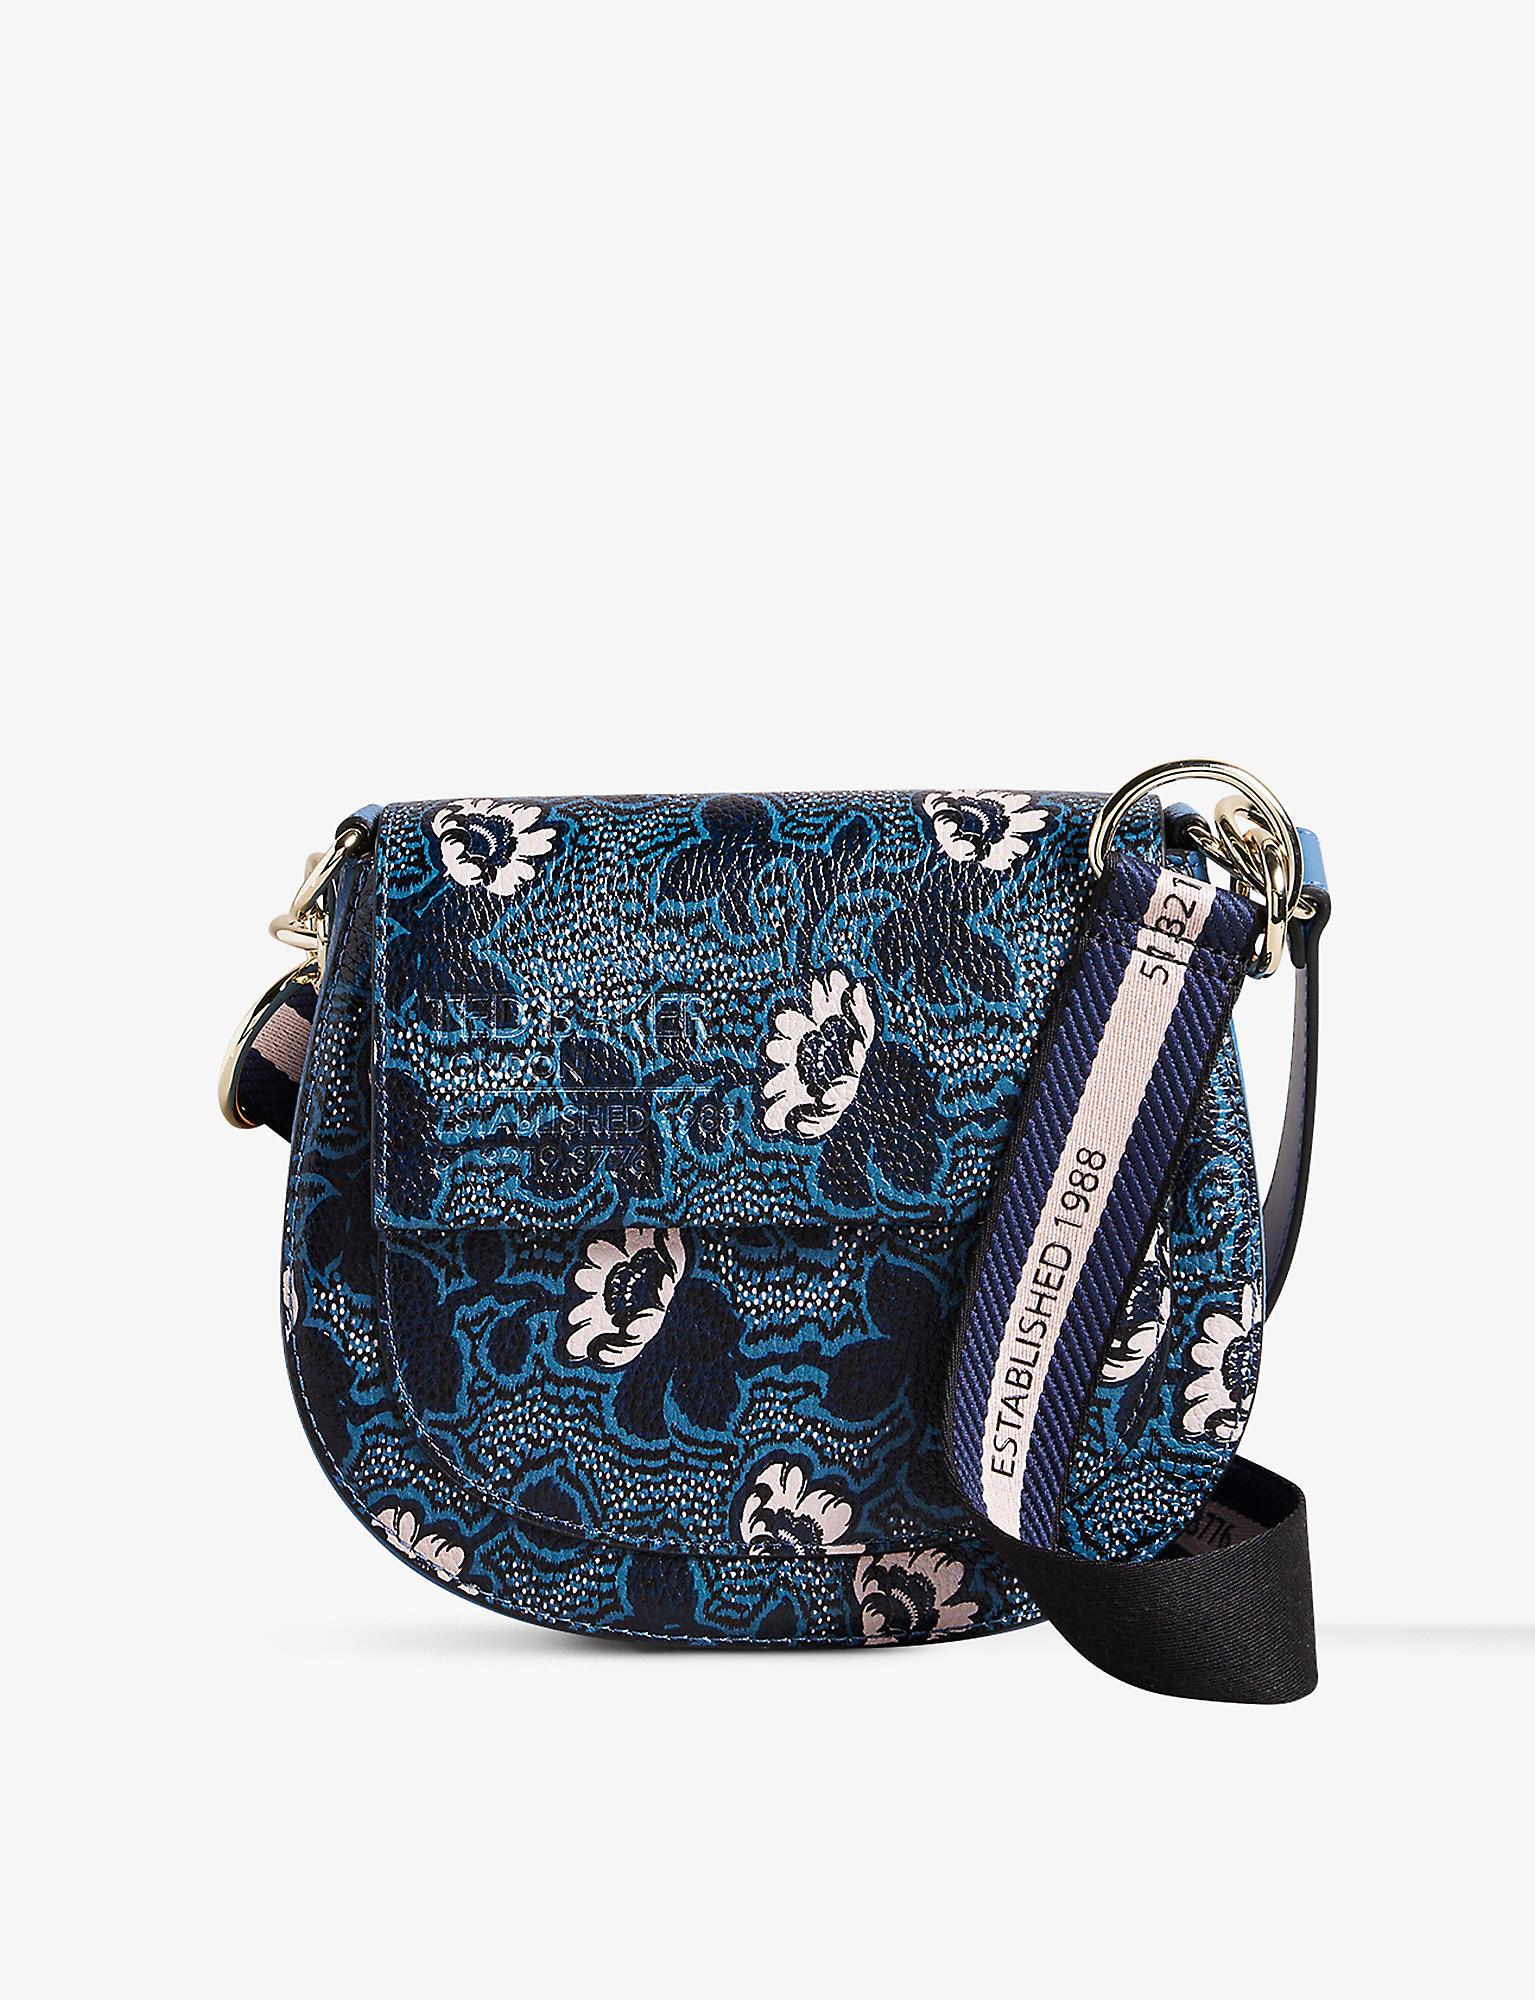 Buy Ted Baker Chayla Floral Crosshatch Cross Body Bag, Dark Blue, One Size  at